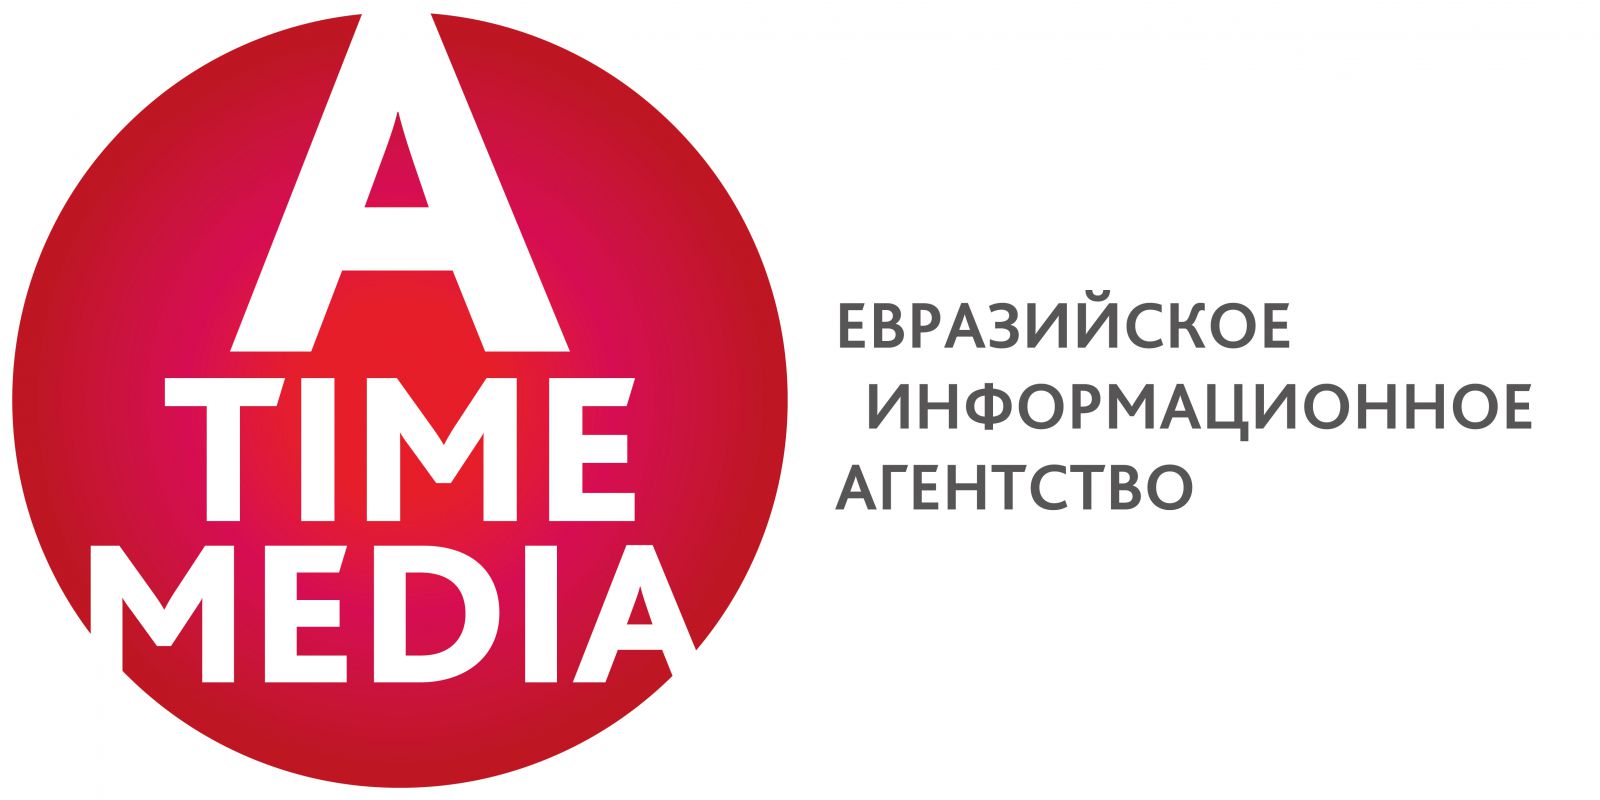 «A - TIME MEDIA»